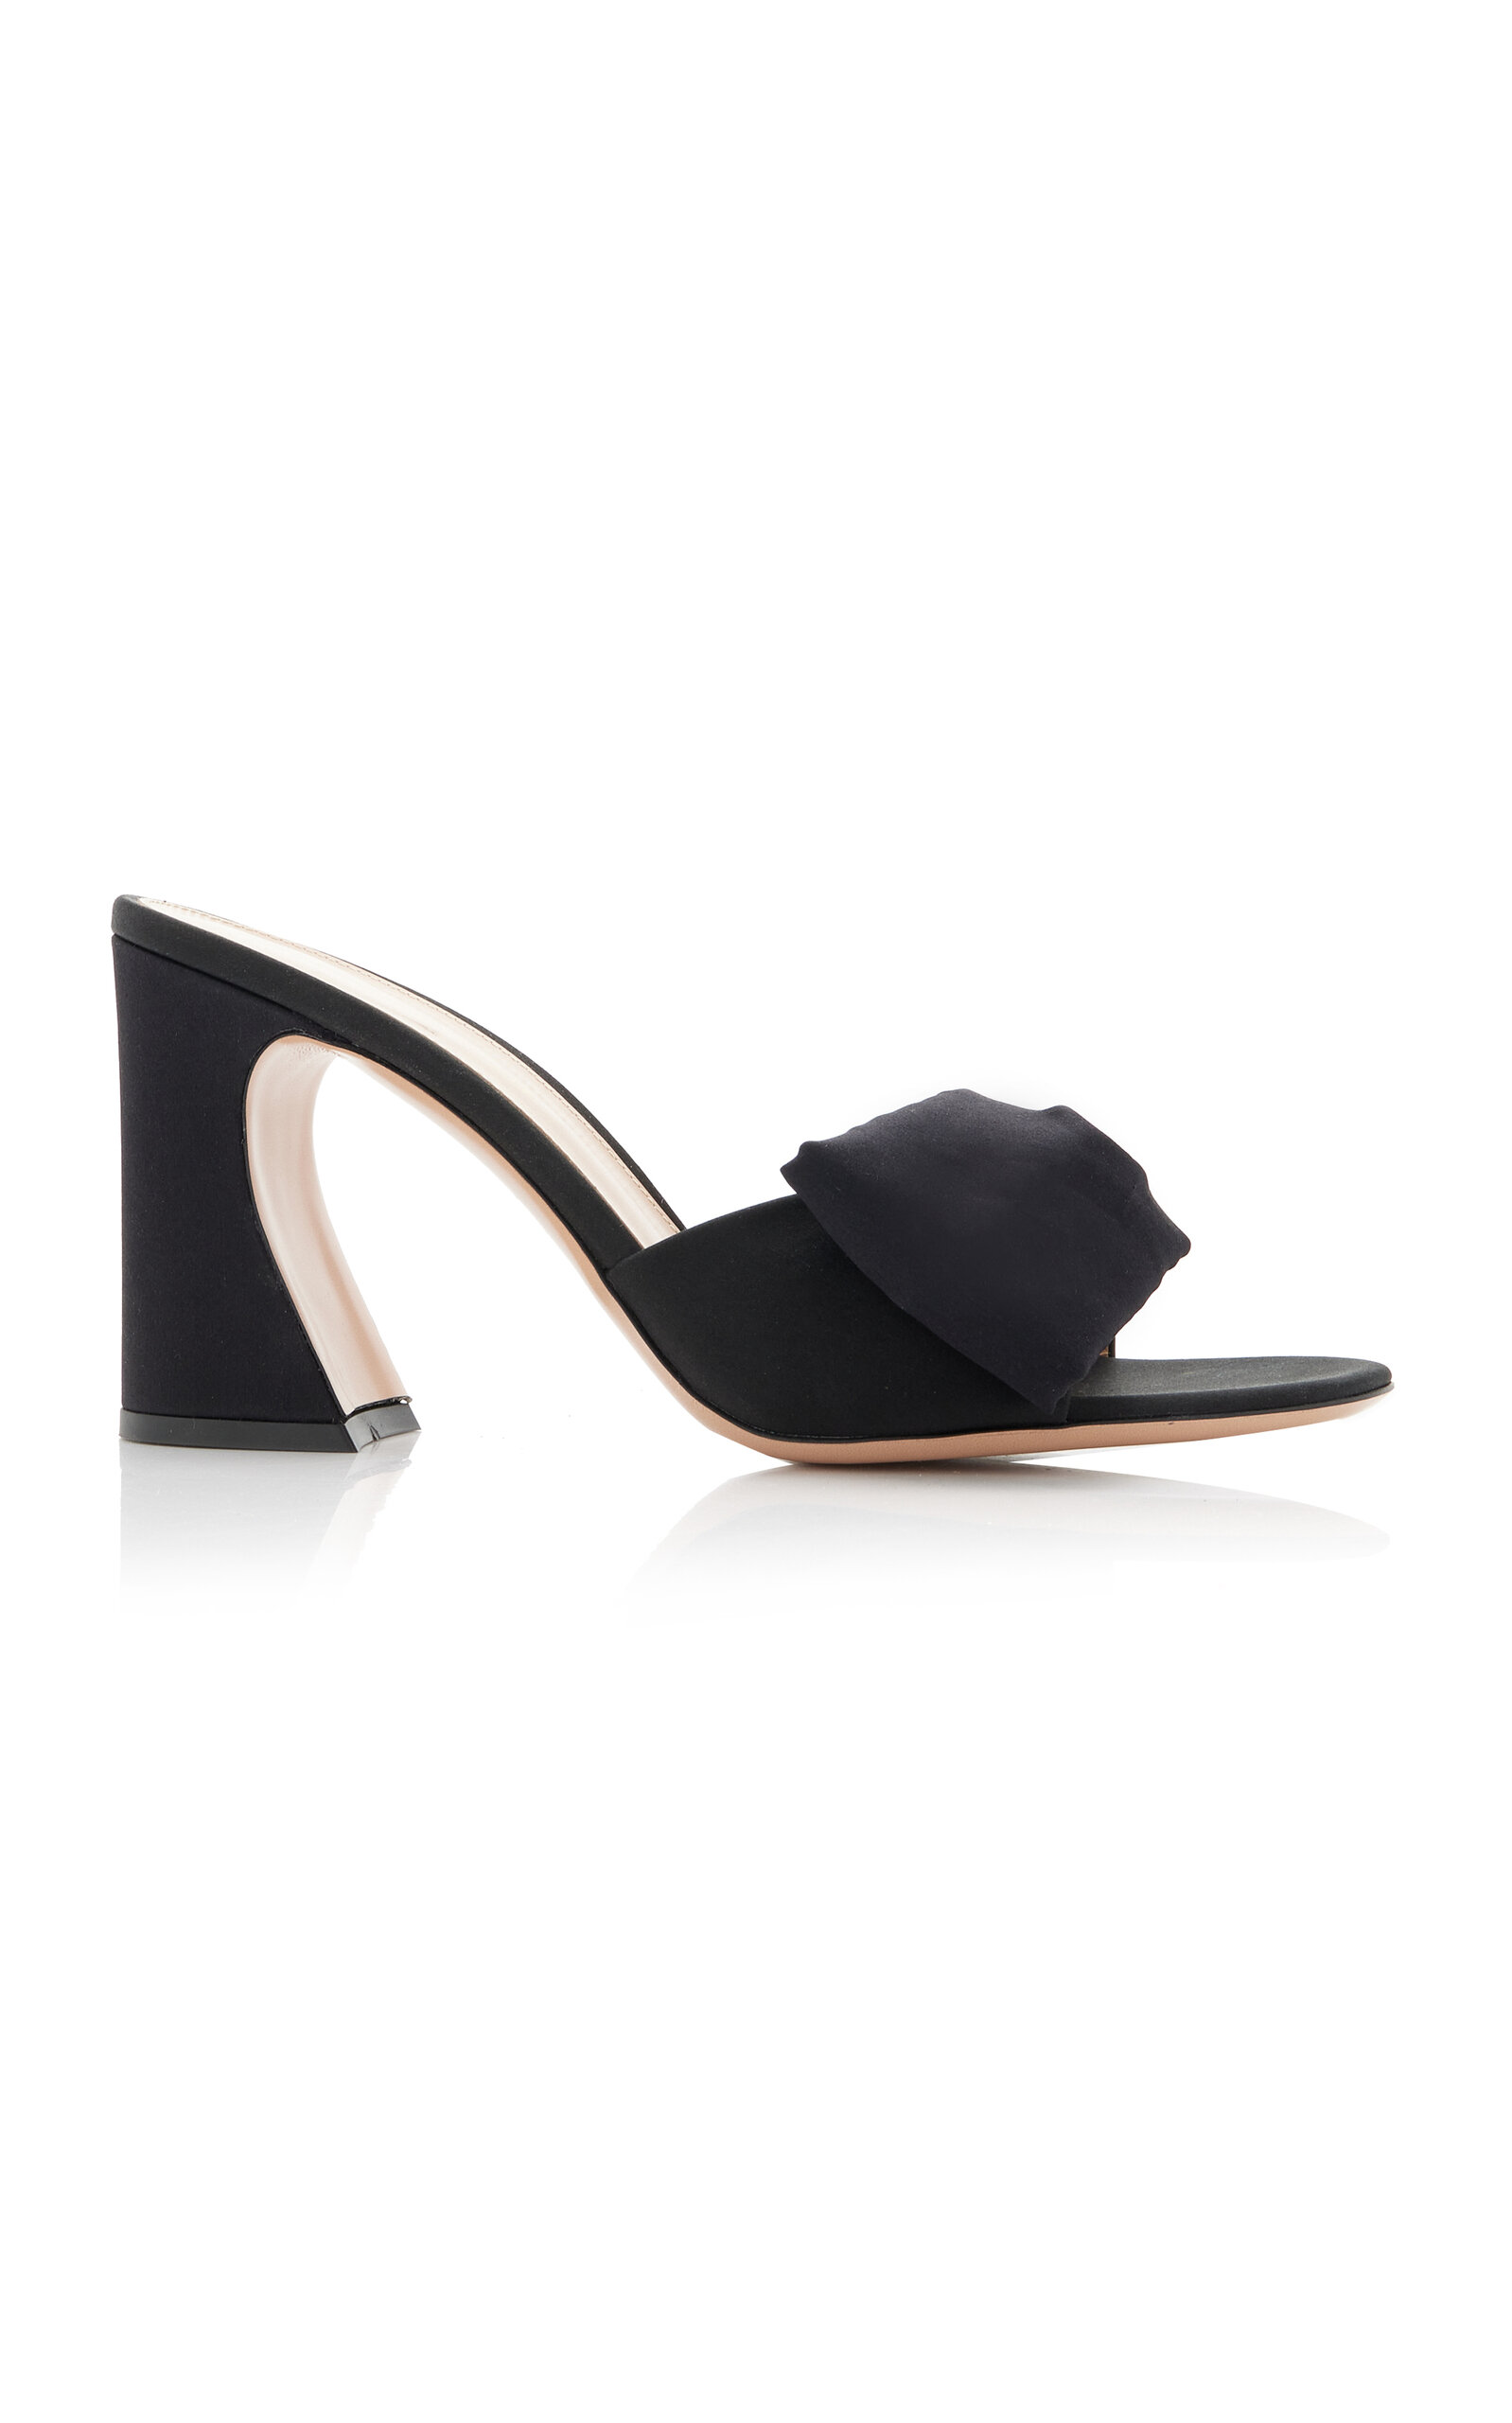 GIANVITO ROSSI BOW-DETAILED SATIN MULES